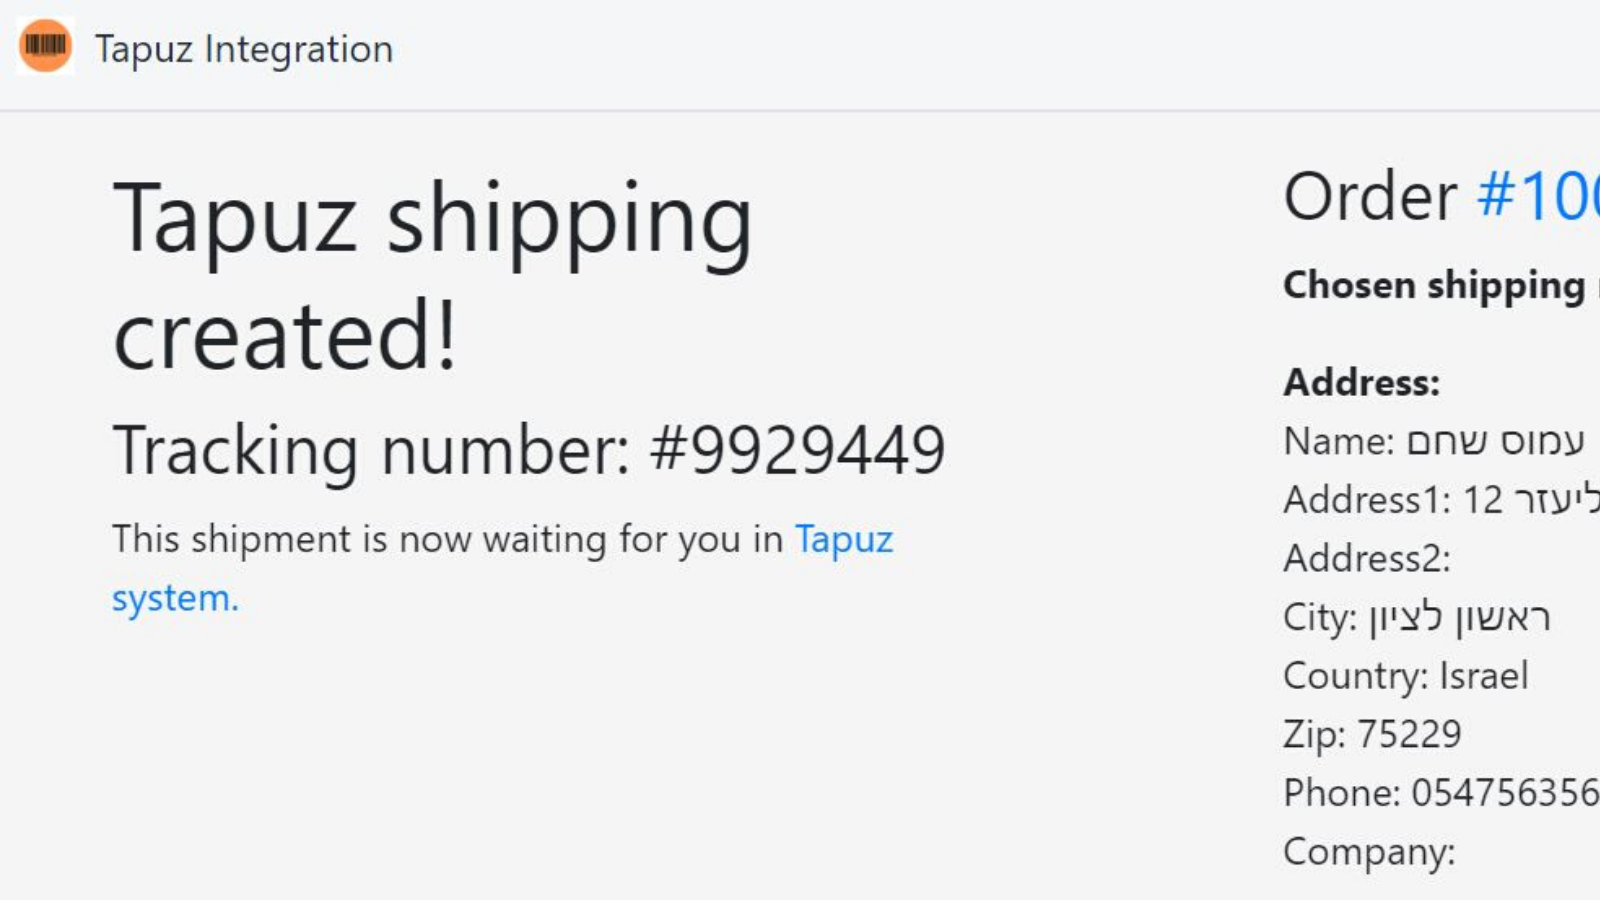 Get Tapuz shipment tracking number confirmation